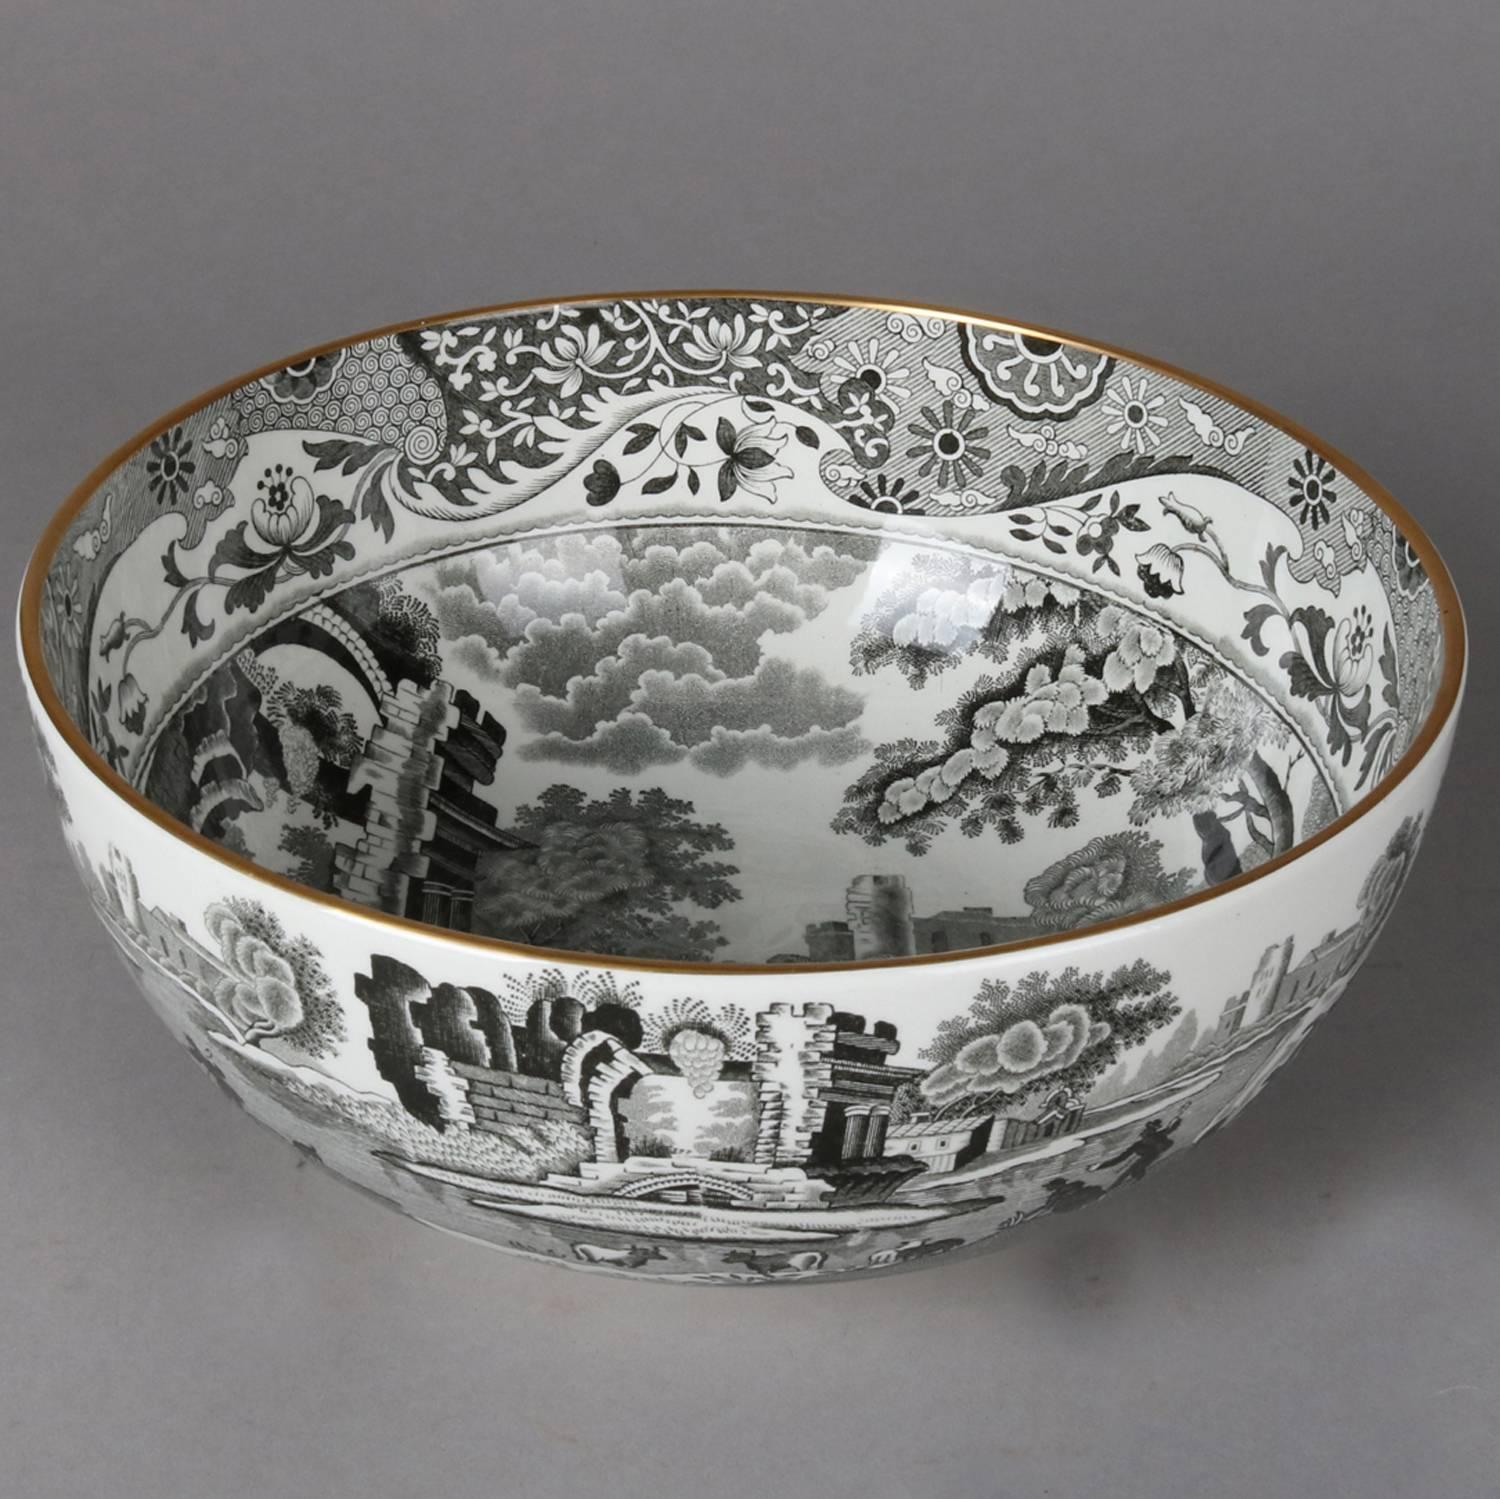 English black transfer ware porcelain serving bowl features countryside scene and gold gilt rim trim, mark on base 